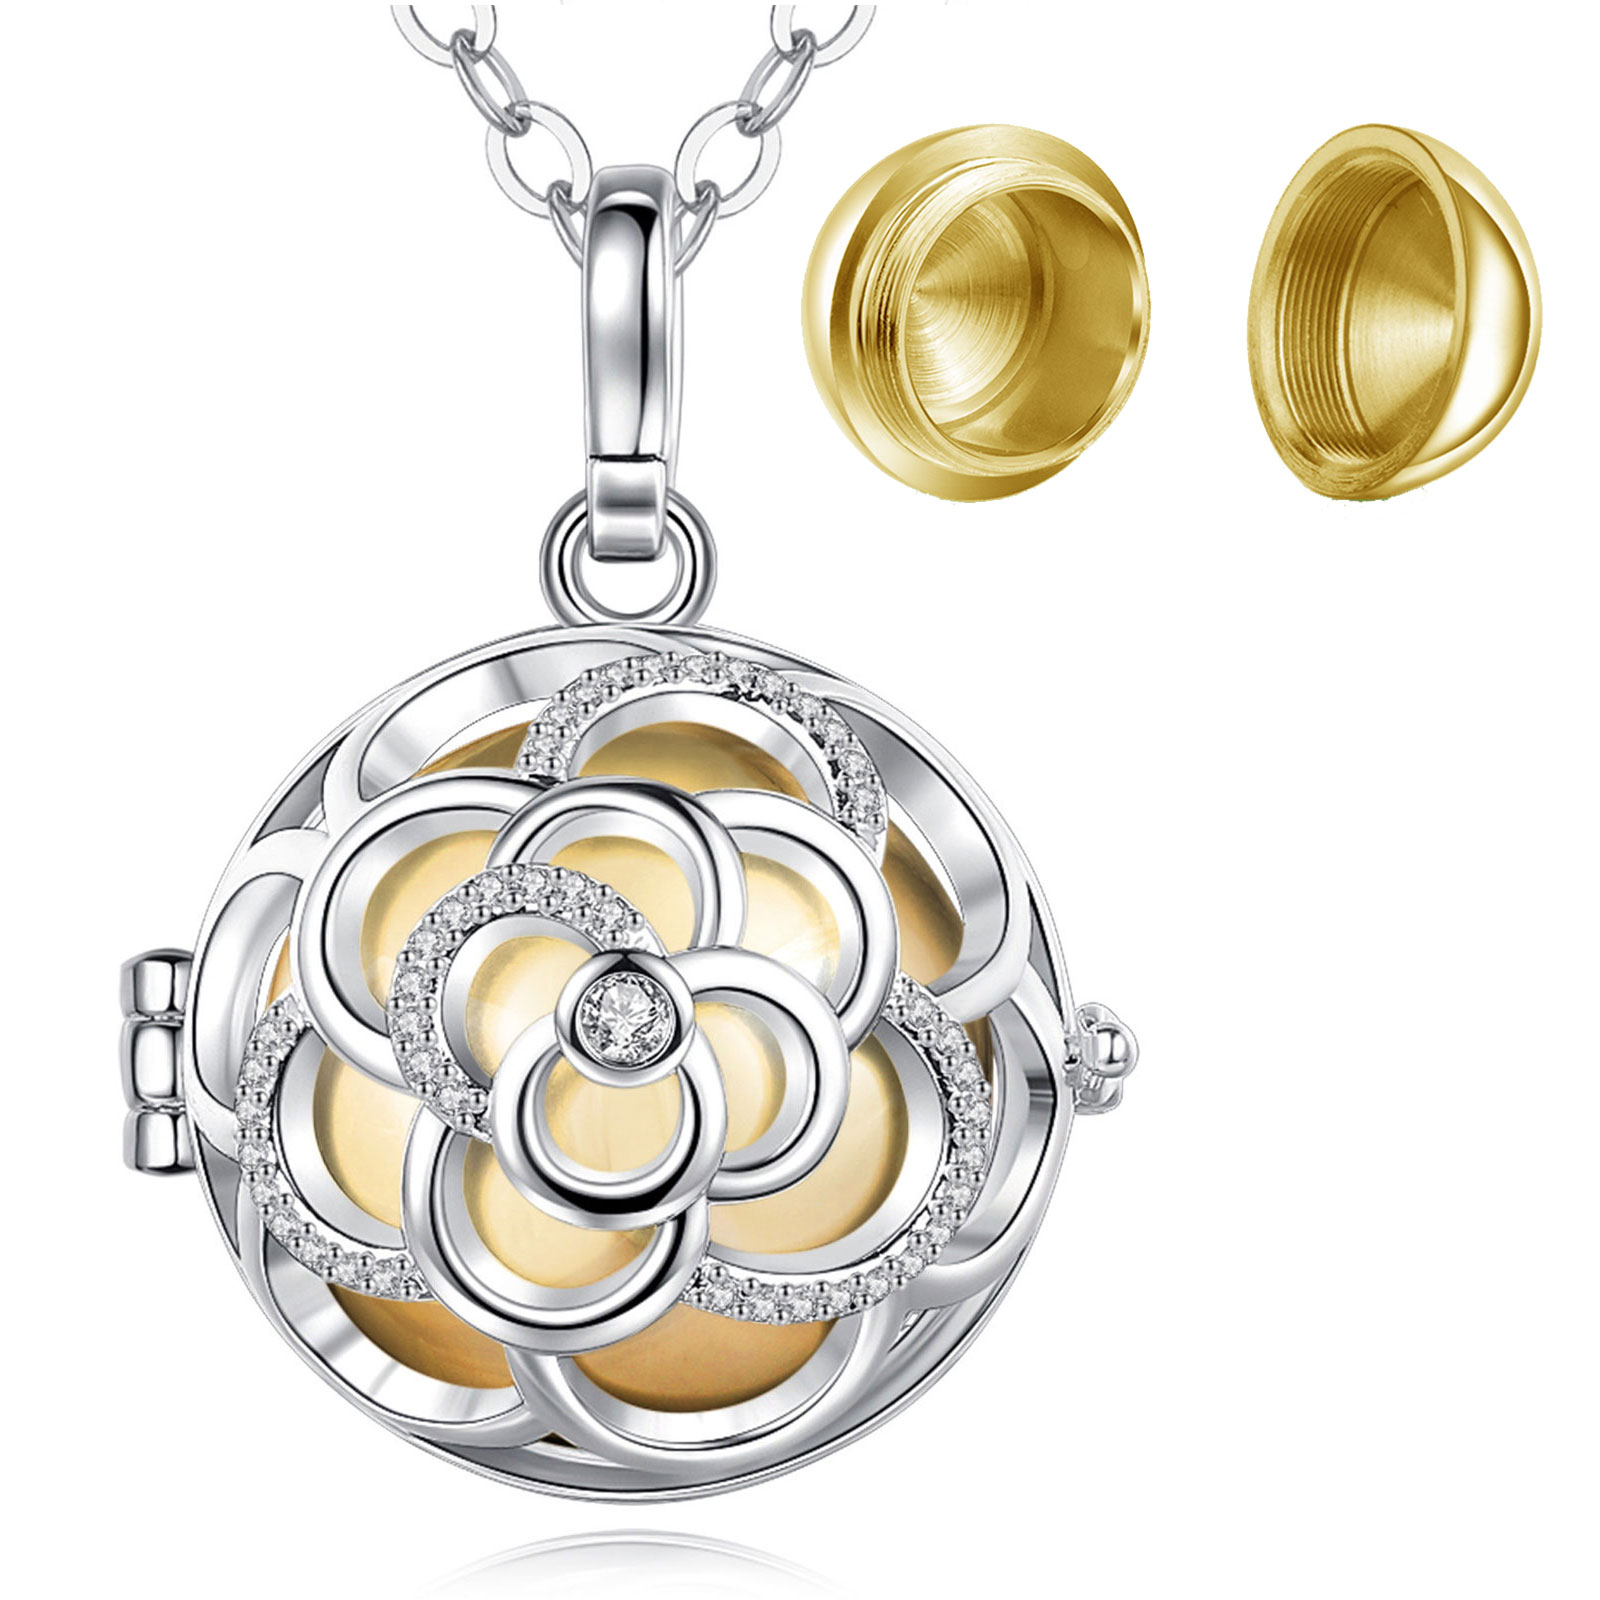 Merryshine Memorial Keepsake Jewelry Hollow Cage Capsule Cremation Necklace for Ashes Dad